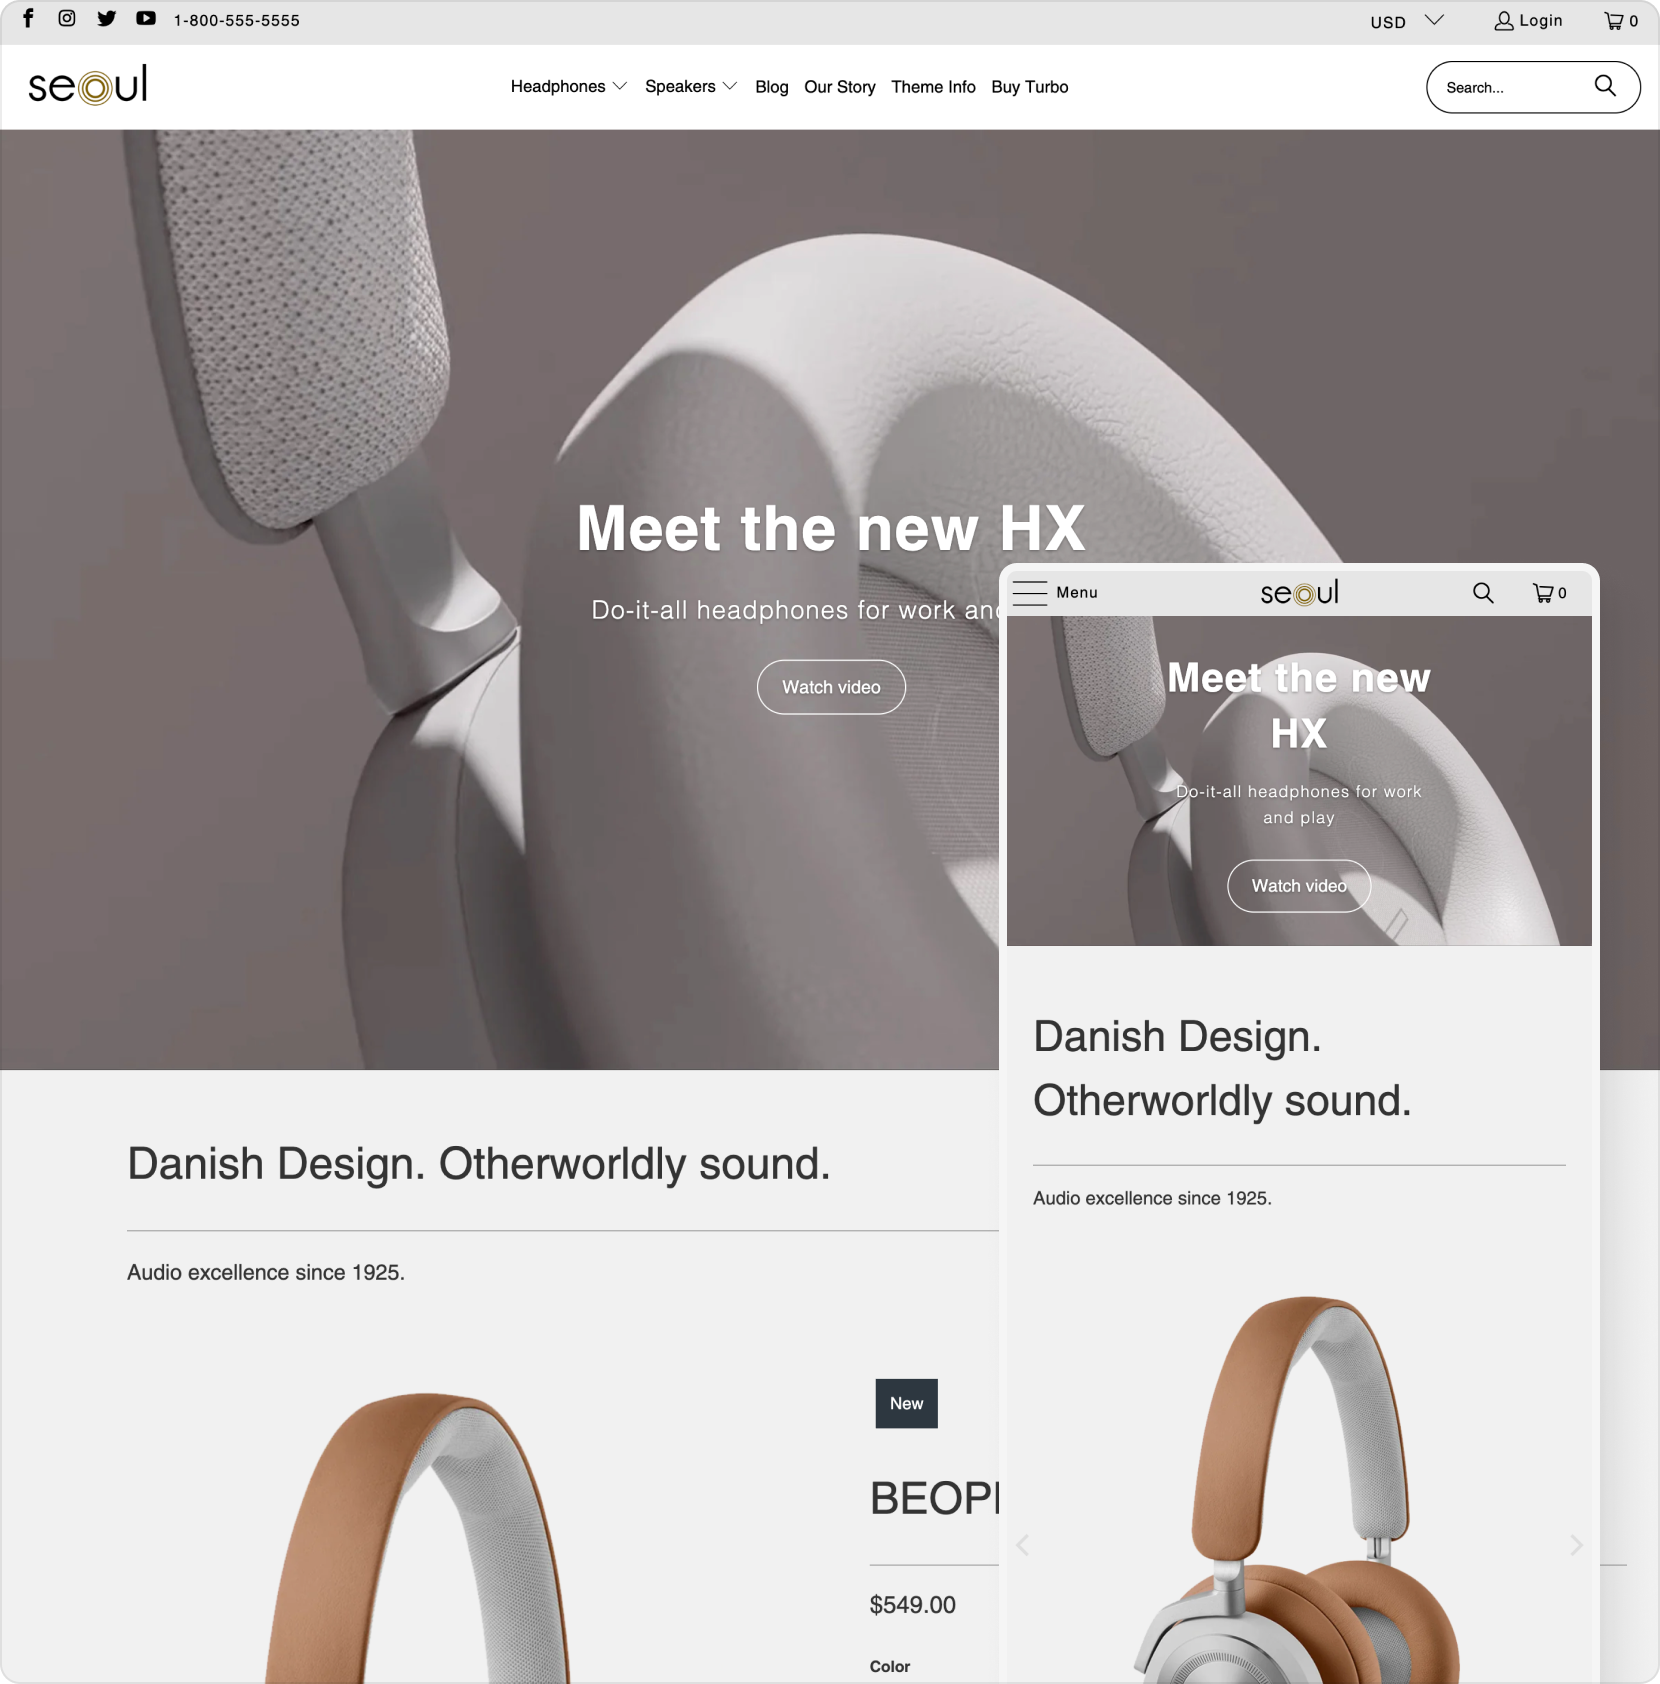 turbo shopify theme seoul theme style home page shown desktop and mobile devices